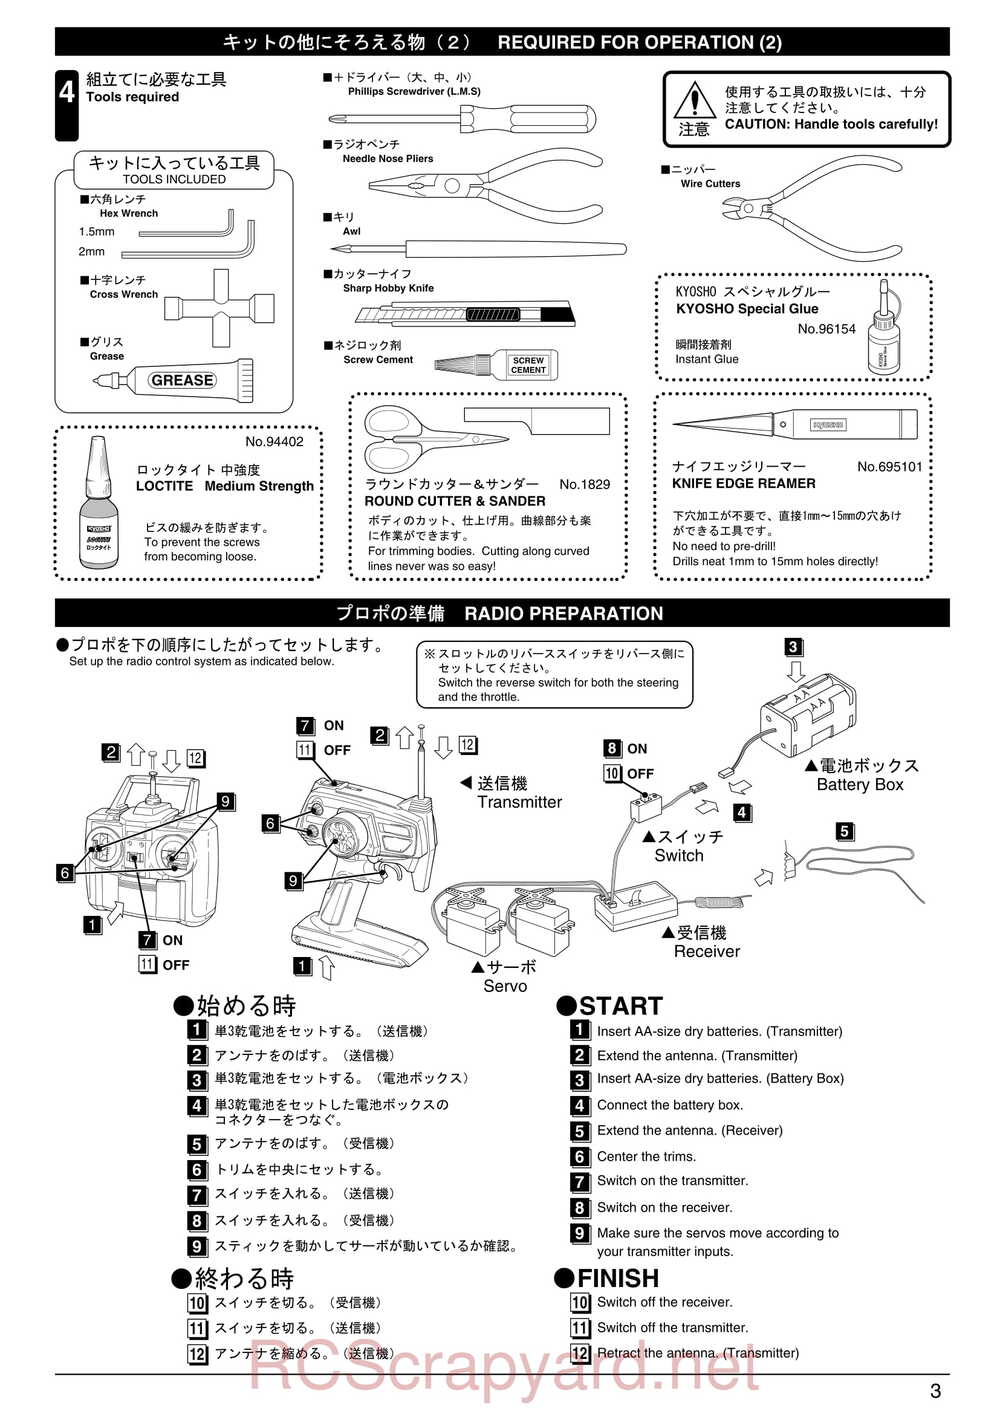 Kyosho - 31091 - Inferno-TR15 - Manual - Page 03